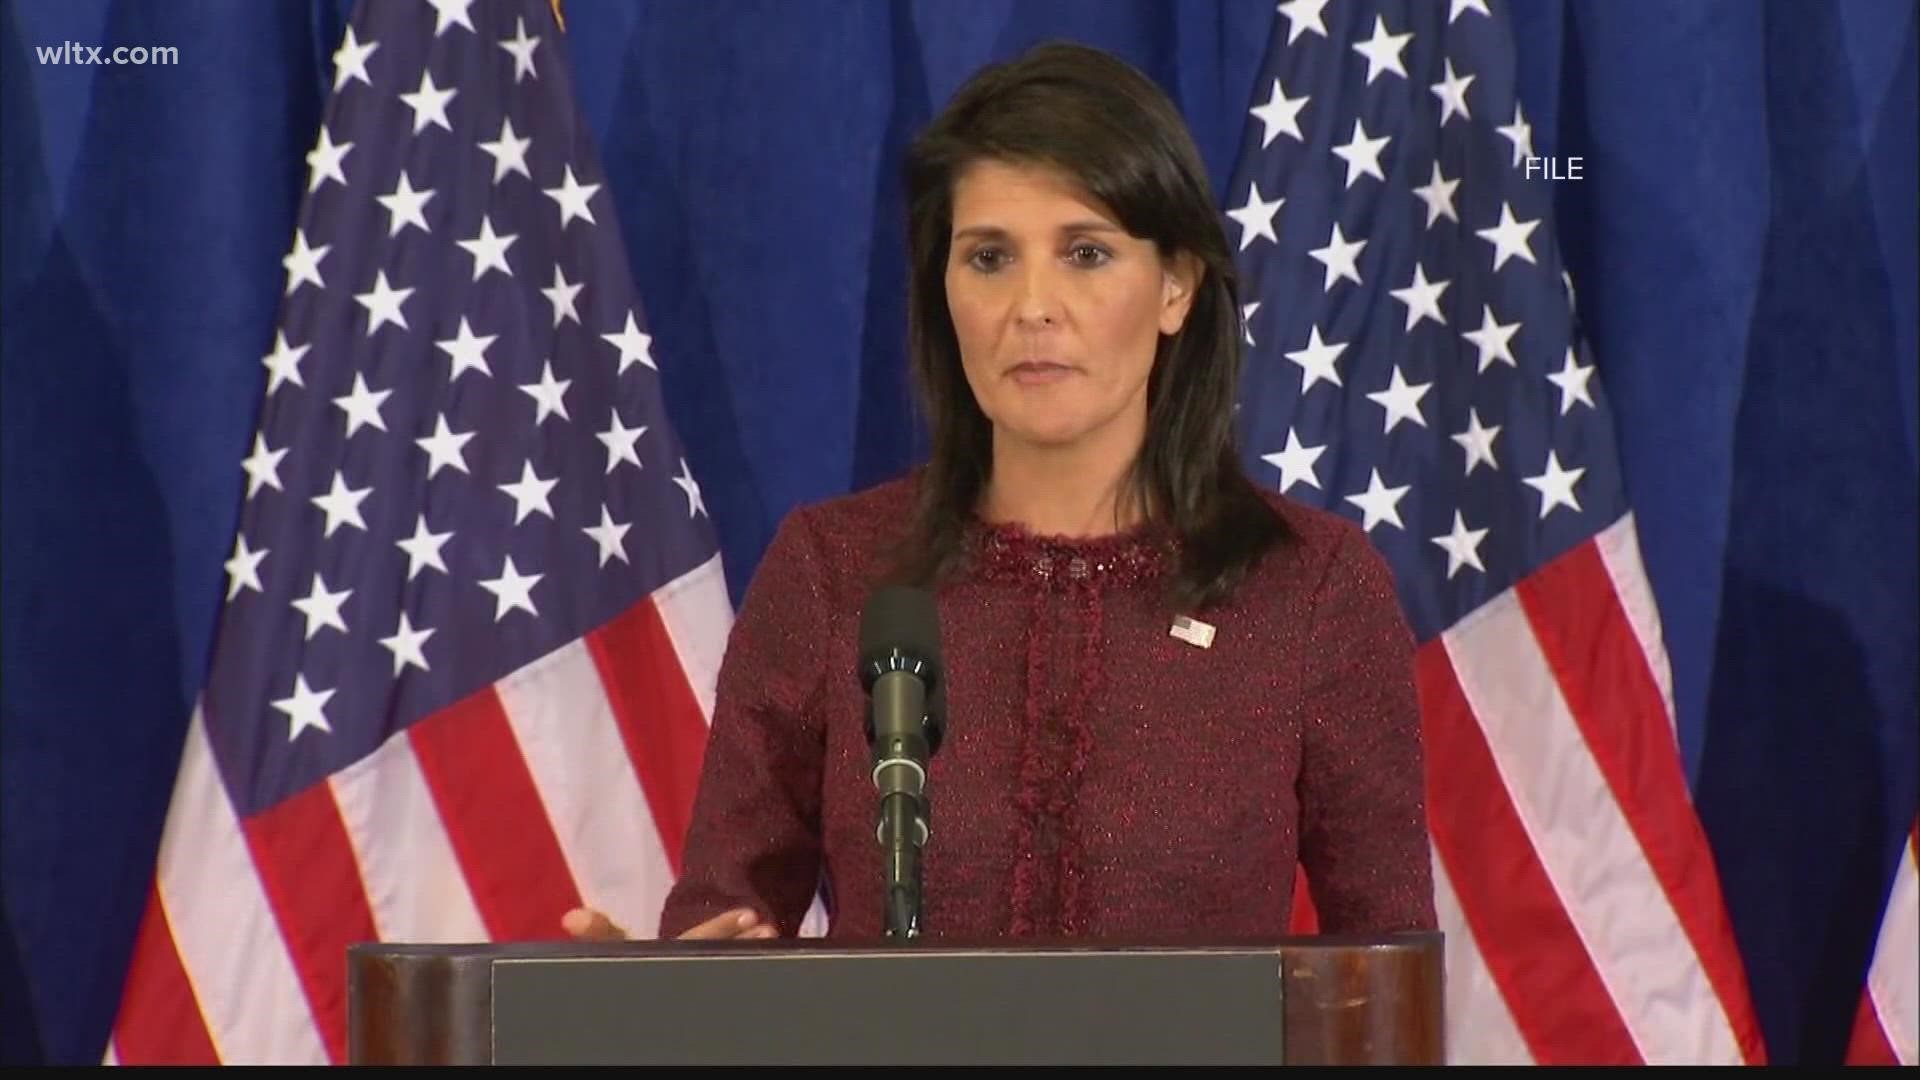 Former UN Ambassador Nikki Haley made the remarks at the Christians United for Israel Summit.